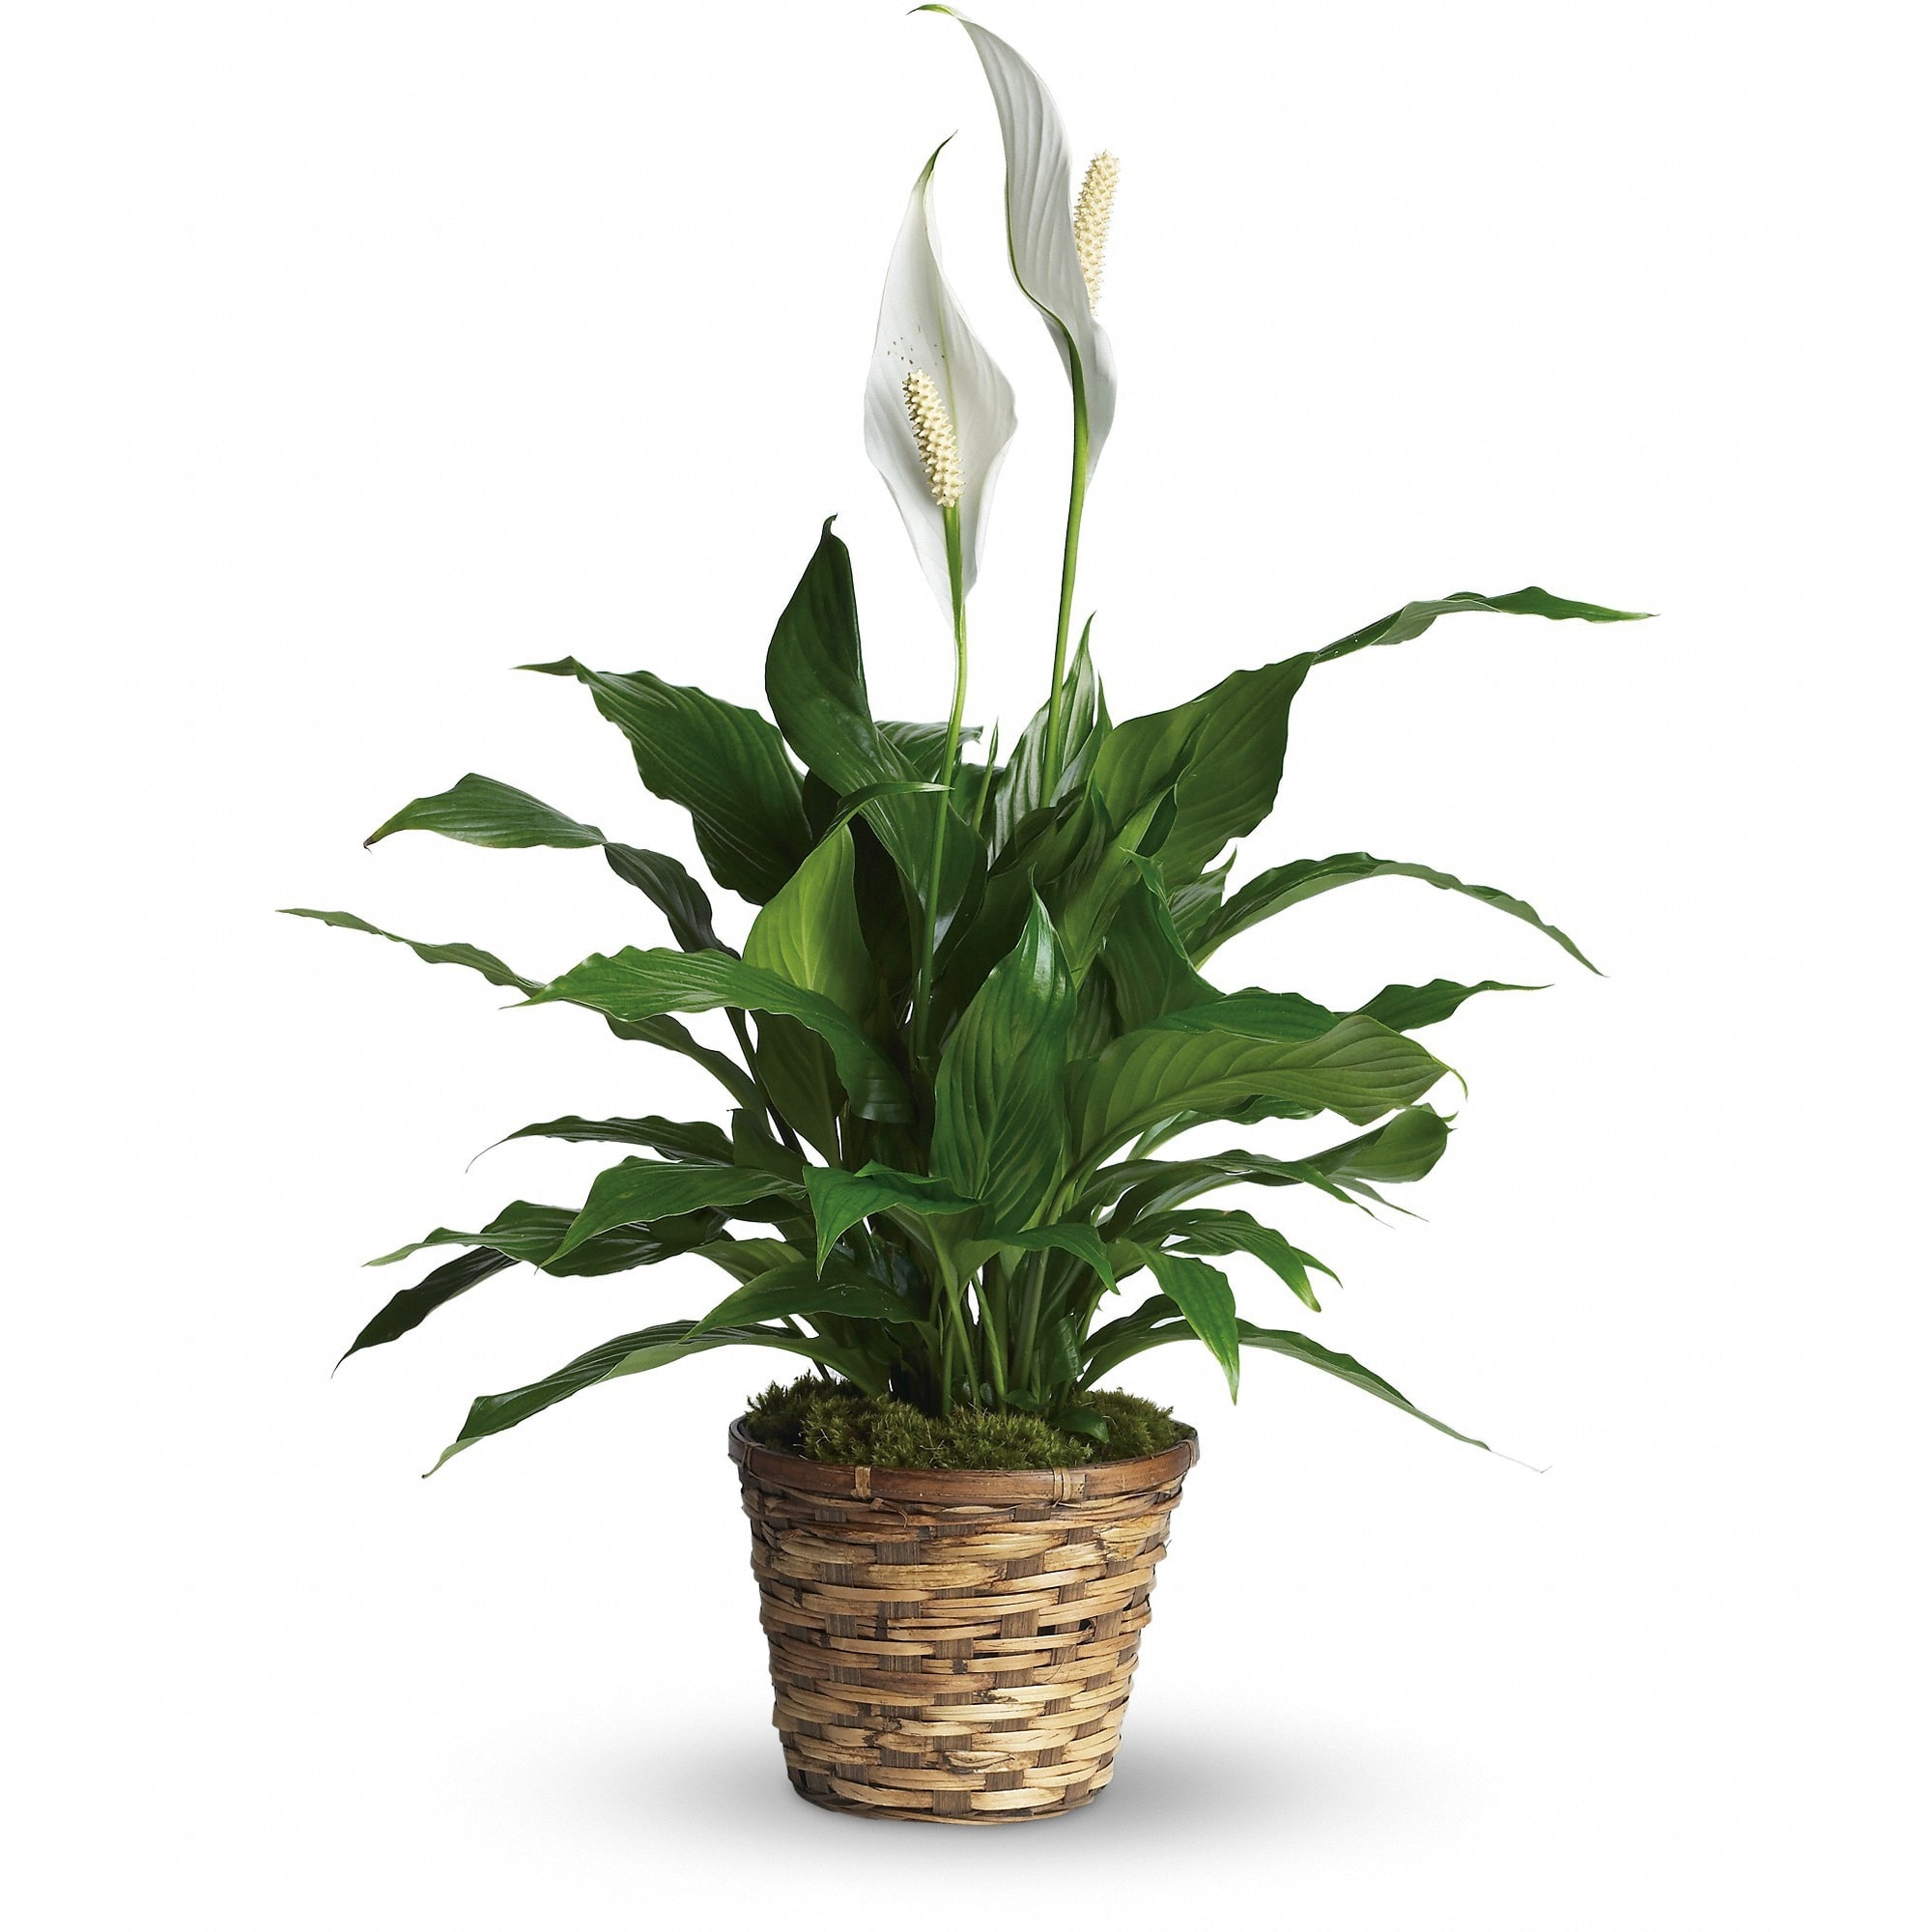 Simply Elegant Peace Lily - A brilliant green spathiphyllum is delivered in a natural wicker basket. Long live elegance! Approximately 22&quot; W x 29 1/2&quot; H. T105-1A  - This plant comes in 4 Inches, 6 inches, or 10 inches in diameter 